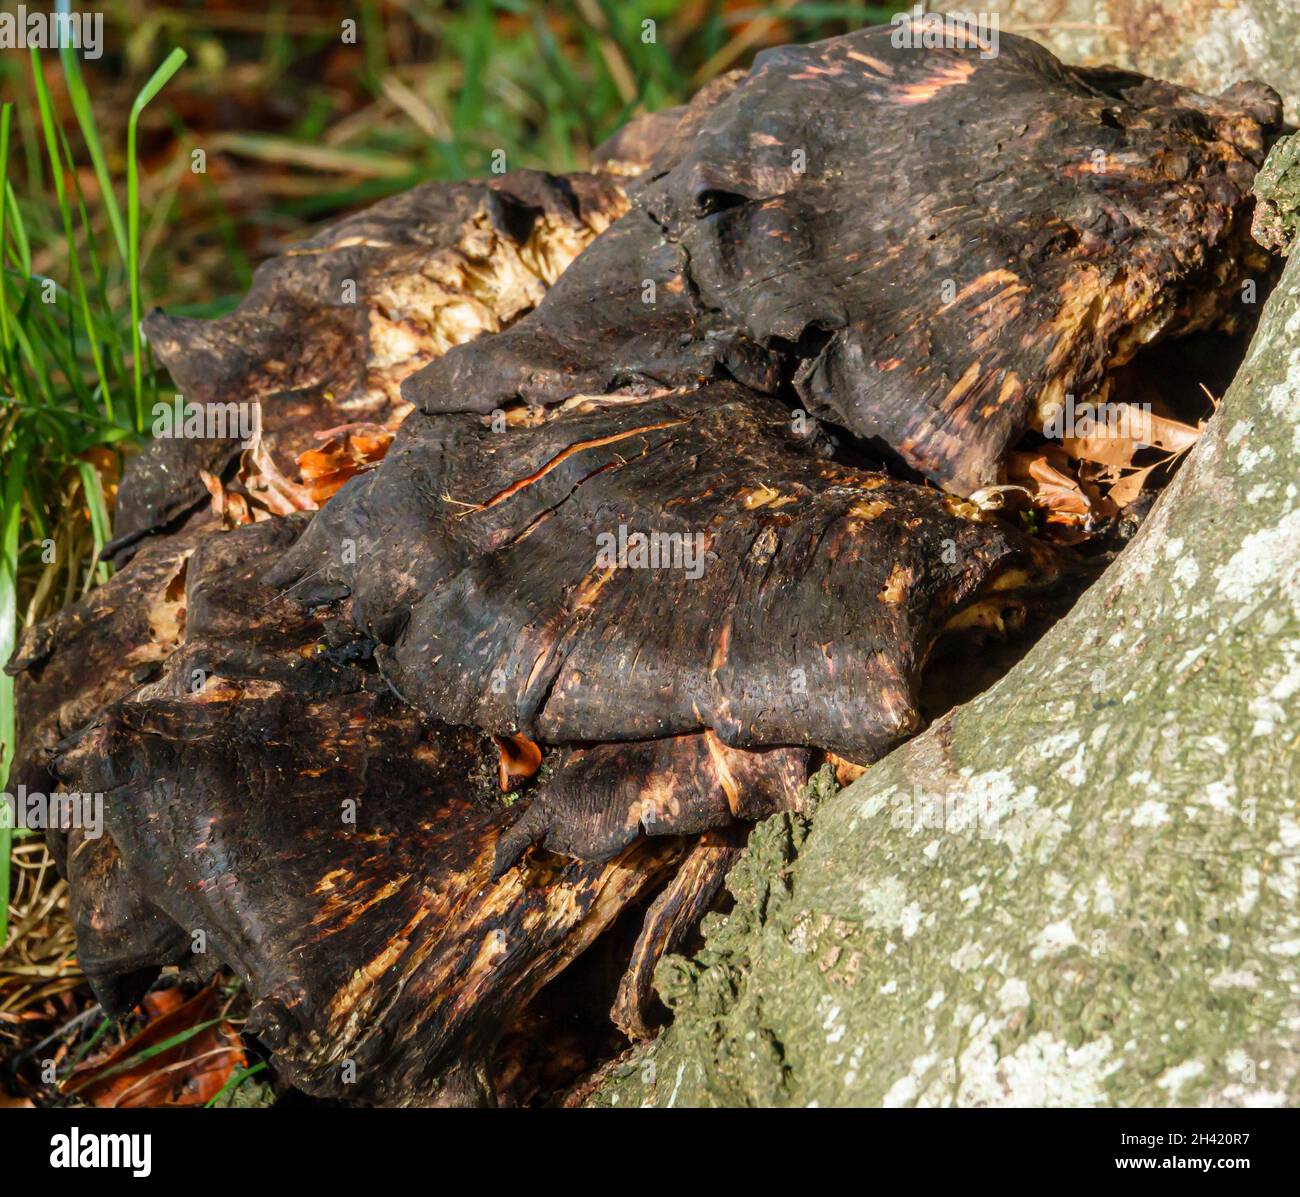 close up of a Chaga mushrooms (Inonotus obliquus) a fungus in the family Hymenochaetaceae. It is parasitic on birch and other trees. Stock Photo